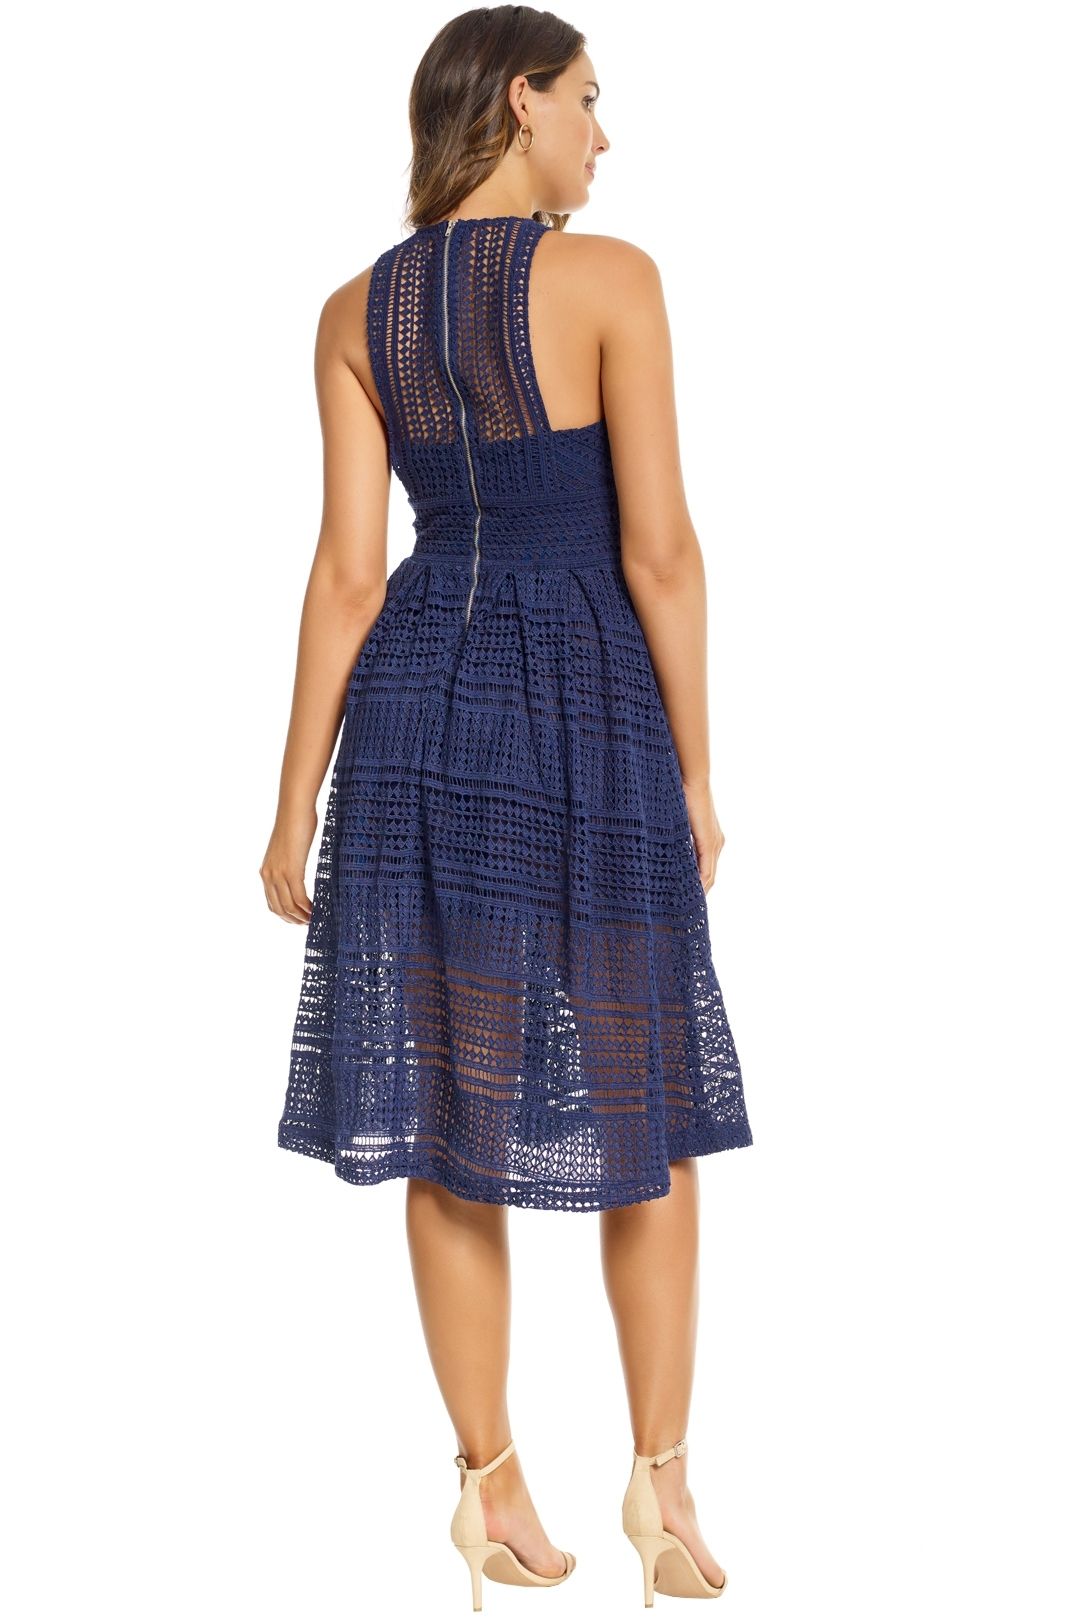 Grace and Hart - Allure Floaty Dress - Navy - Back